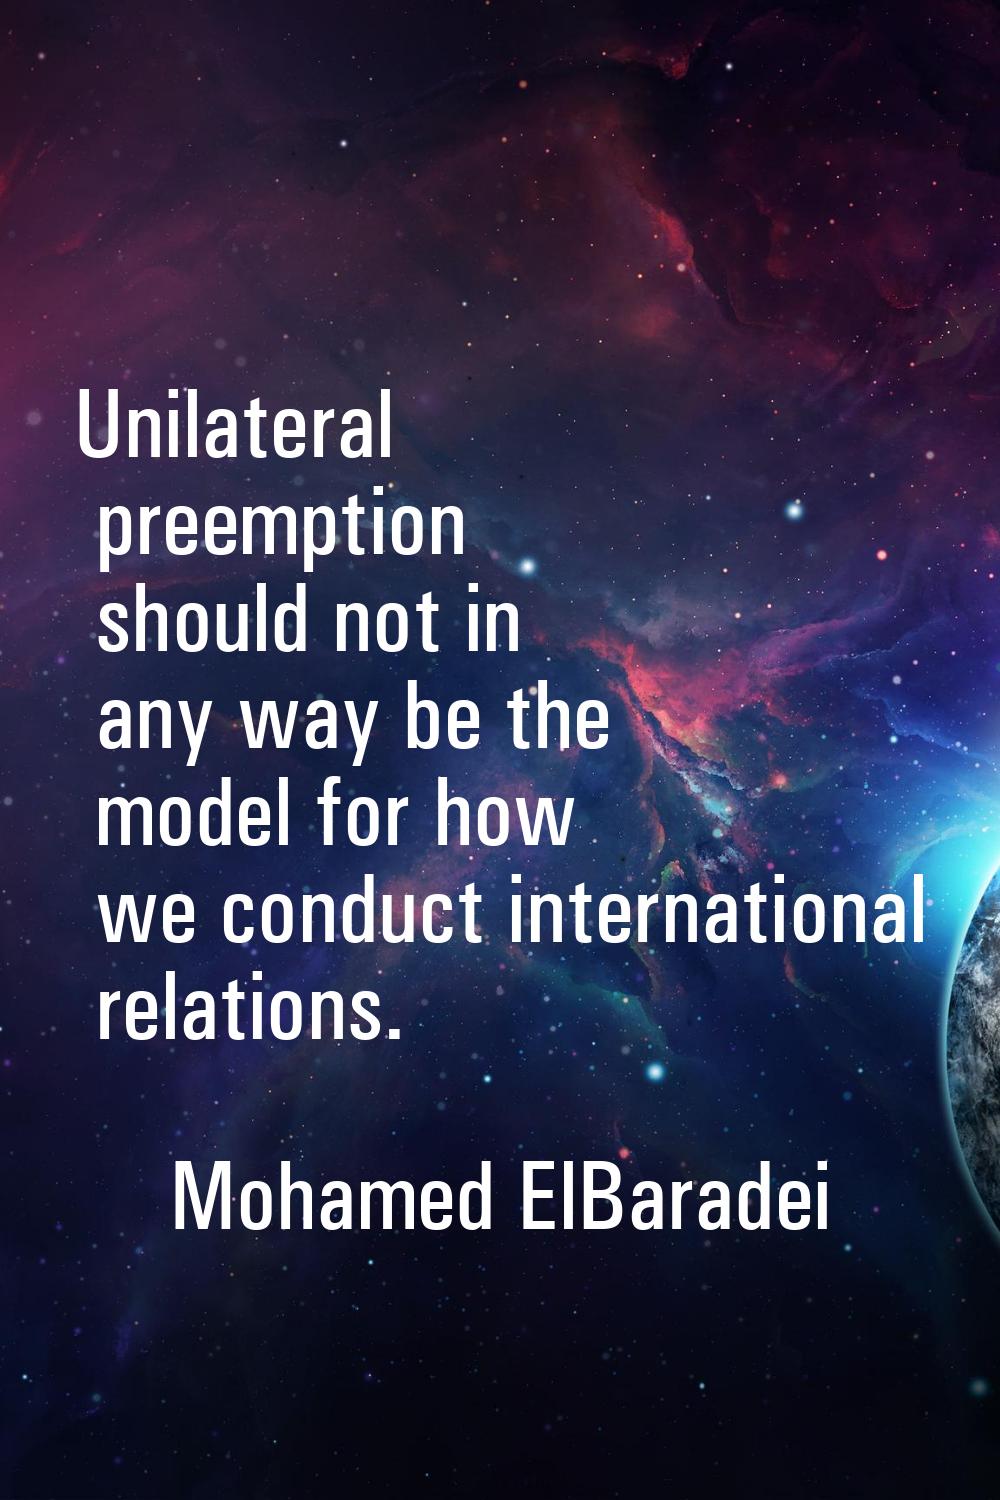 Unilateral preemption should not in any way be the model for how we conduct international relations